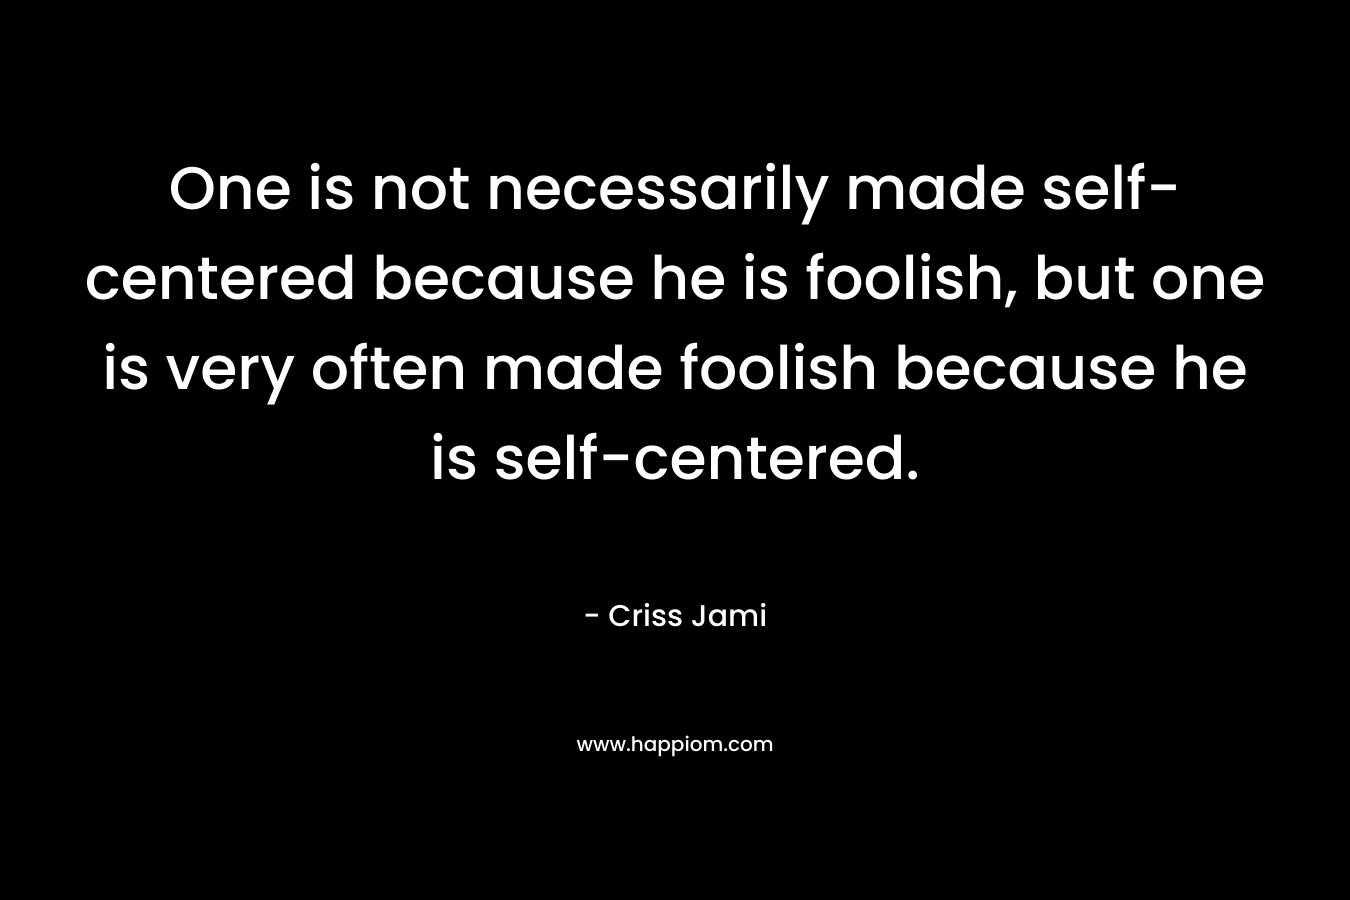 One is not necessarily made self-centered because he is foolish, but one is very often made foolish because he is self-centered.